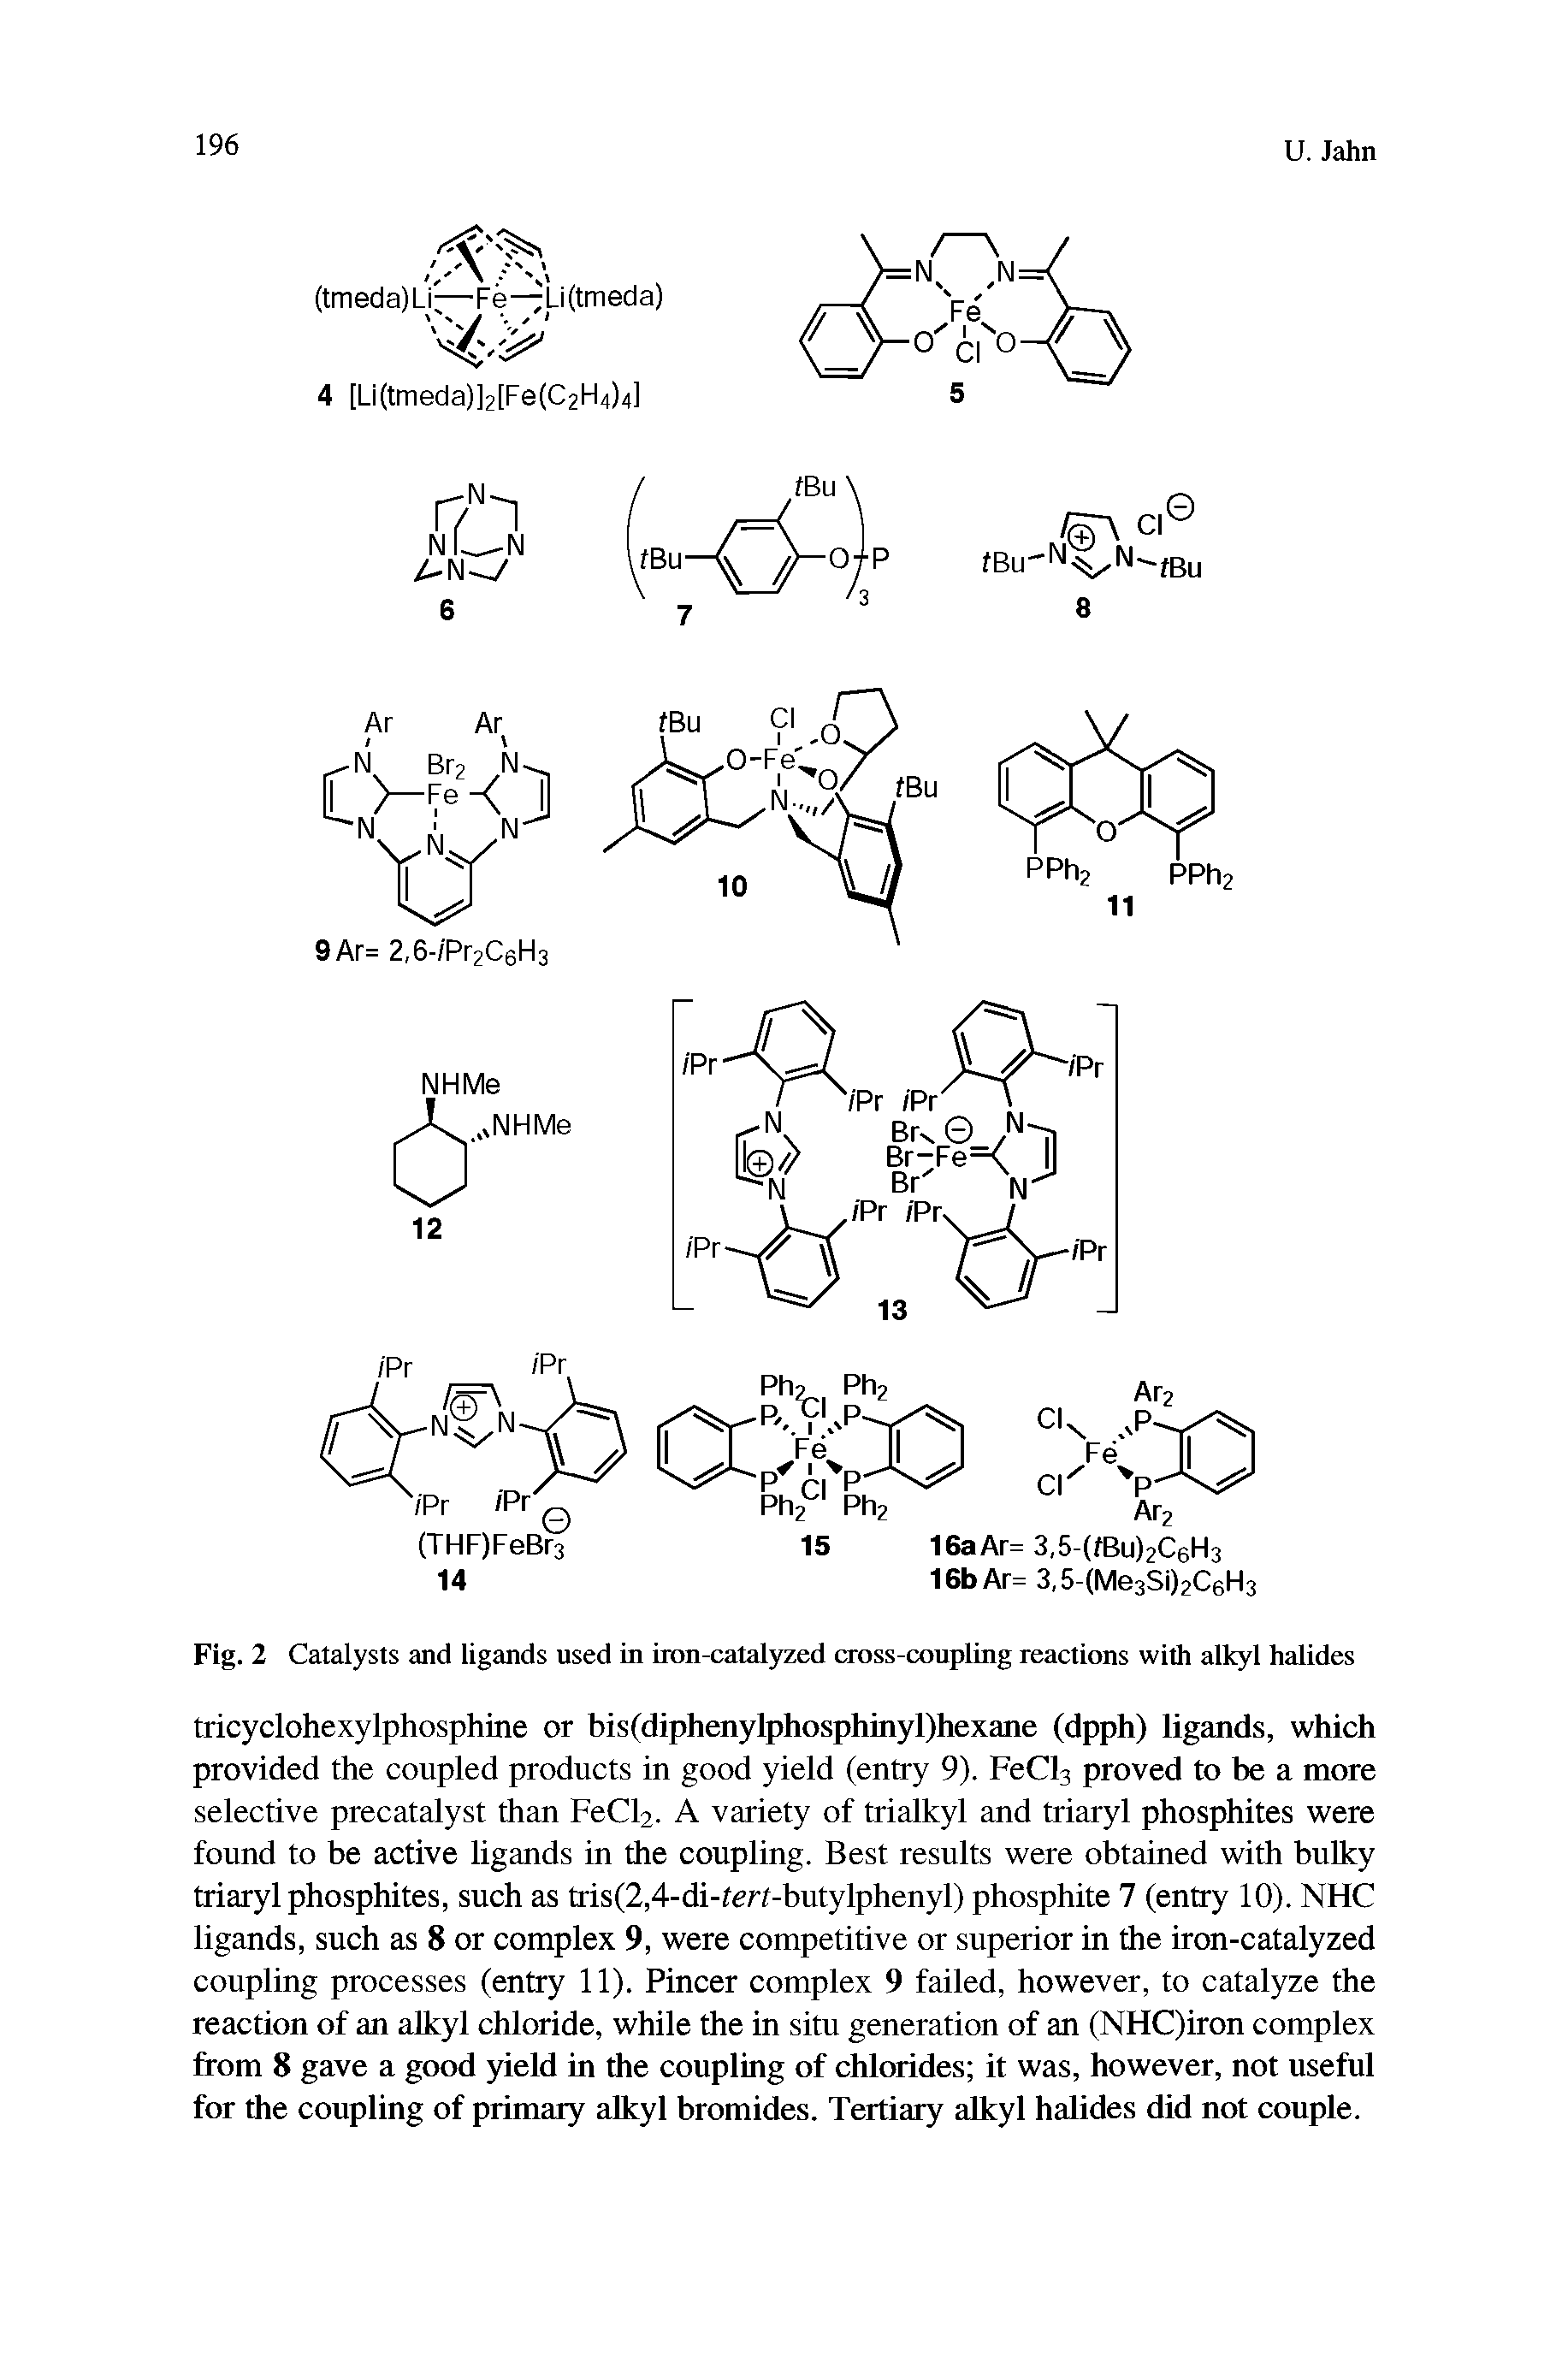 Fig. 2 Catalysts and ligands used in iron-catalyzed cross-coupling reactions with alkyl halides...